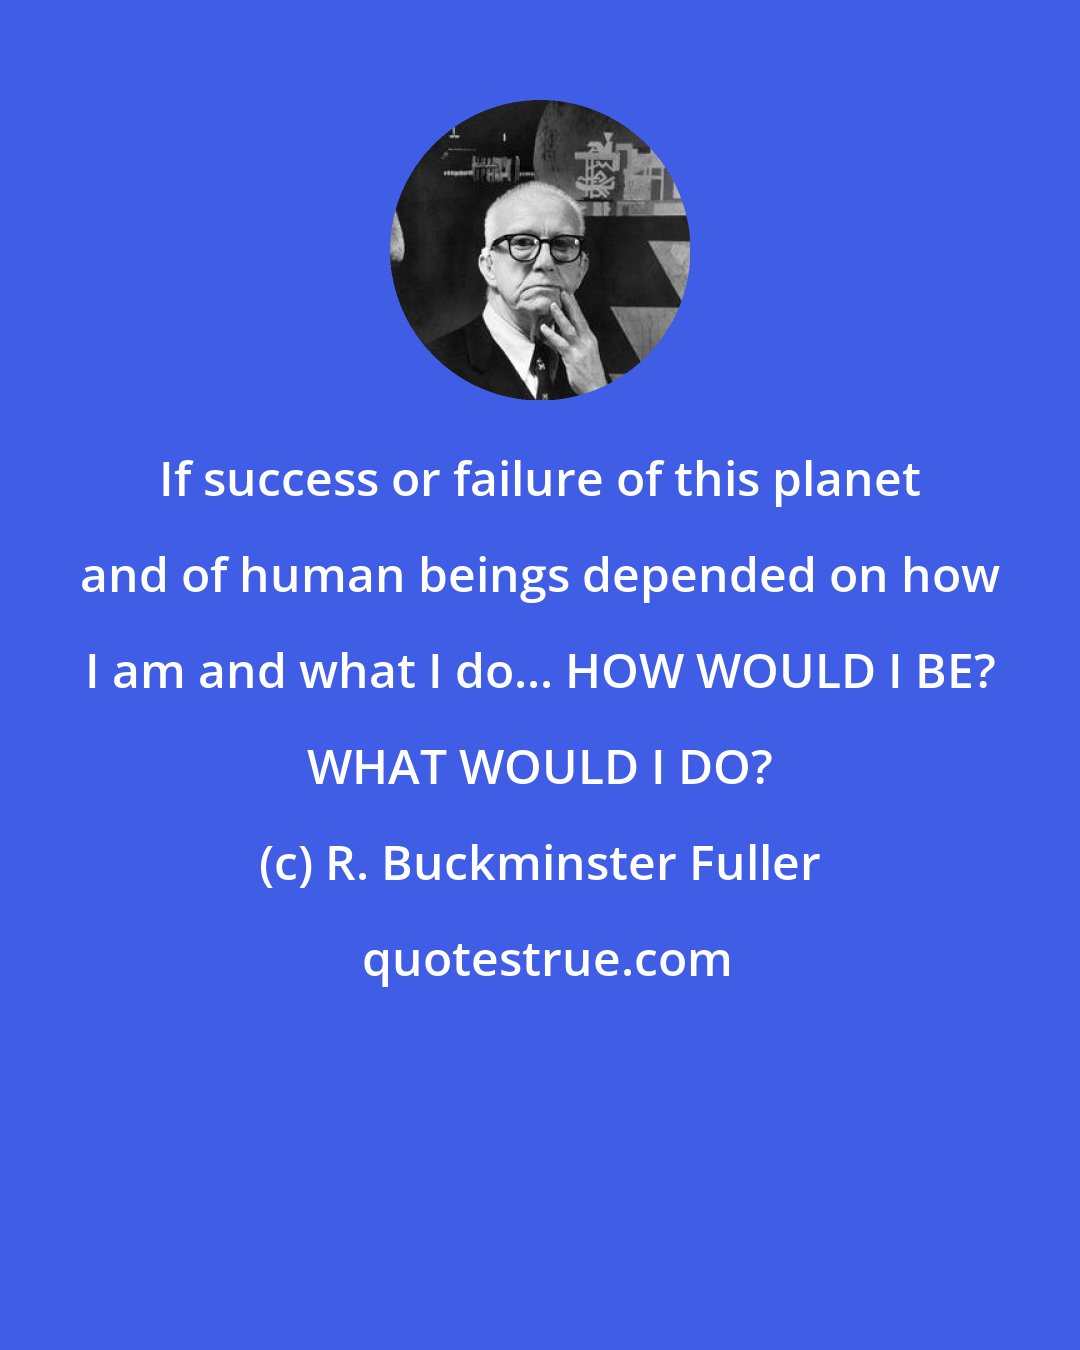 R. Buckminster Fuller: If success or failure of this planet and of human beings depended on how I am and what I do... HOW WOULD I BE? WHAT WOULD I DO?